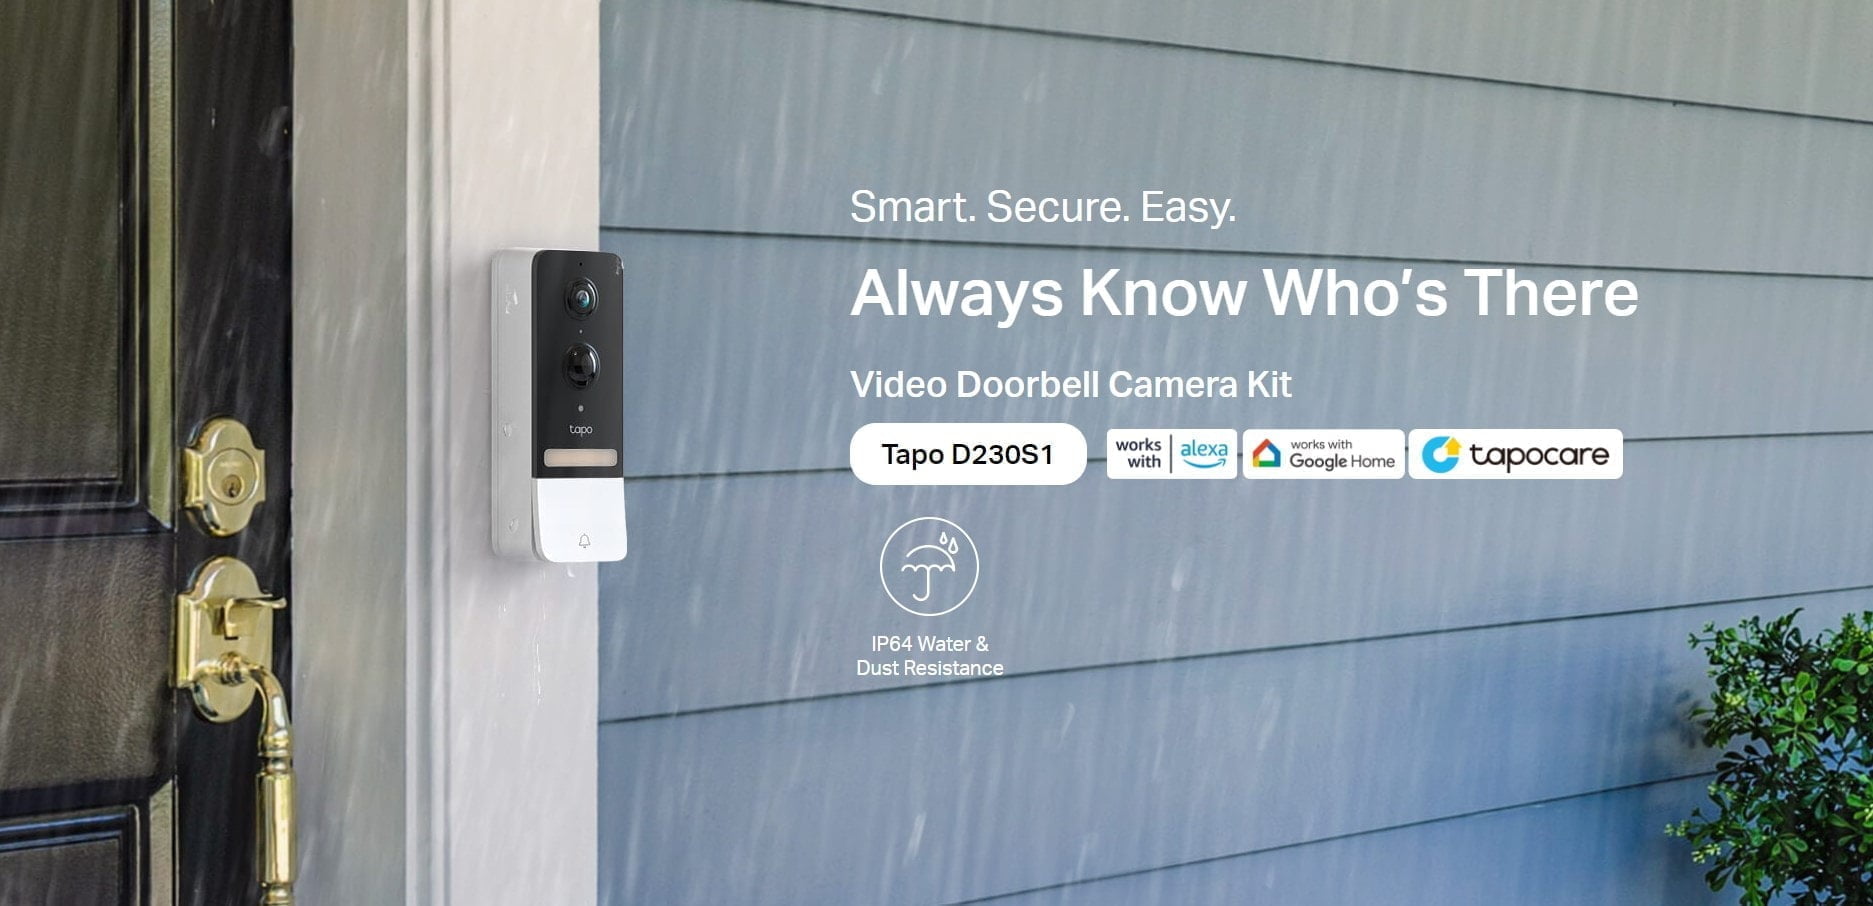 TP-Link Tapo D230S1 Video Doorbell Announced for £150